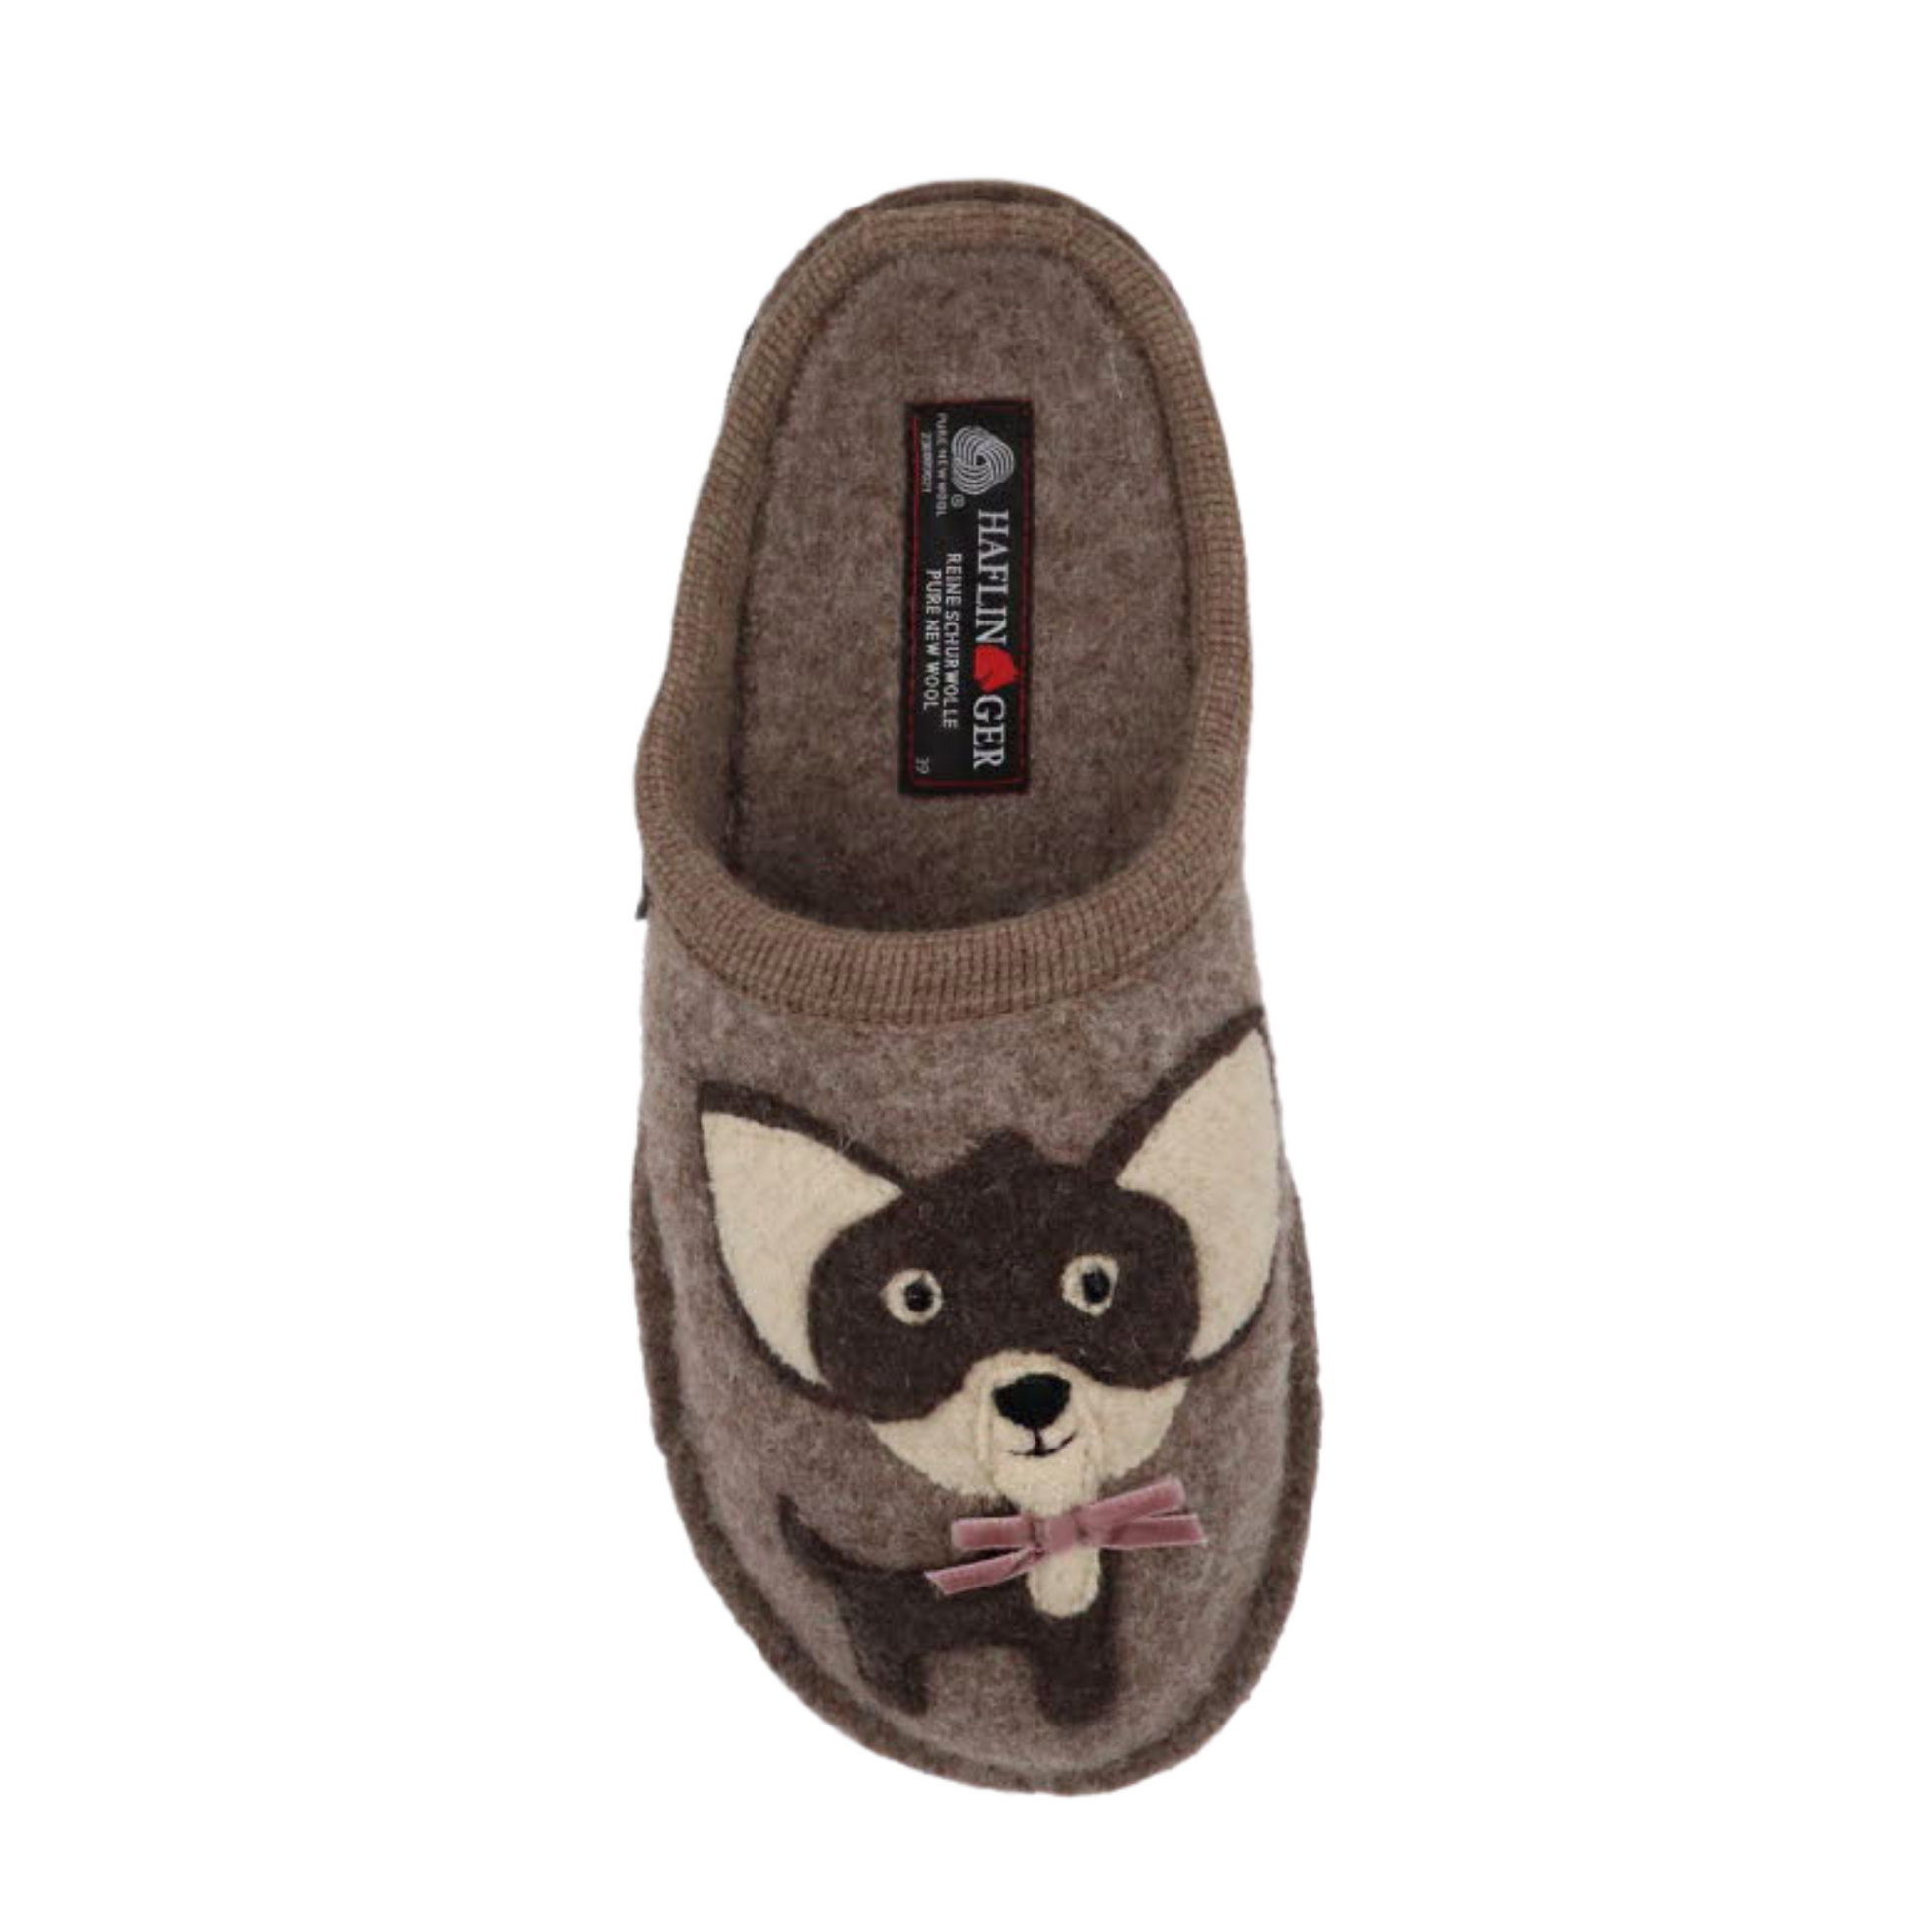 A top view of a tan wool slipper with a chihuahua design.